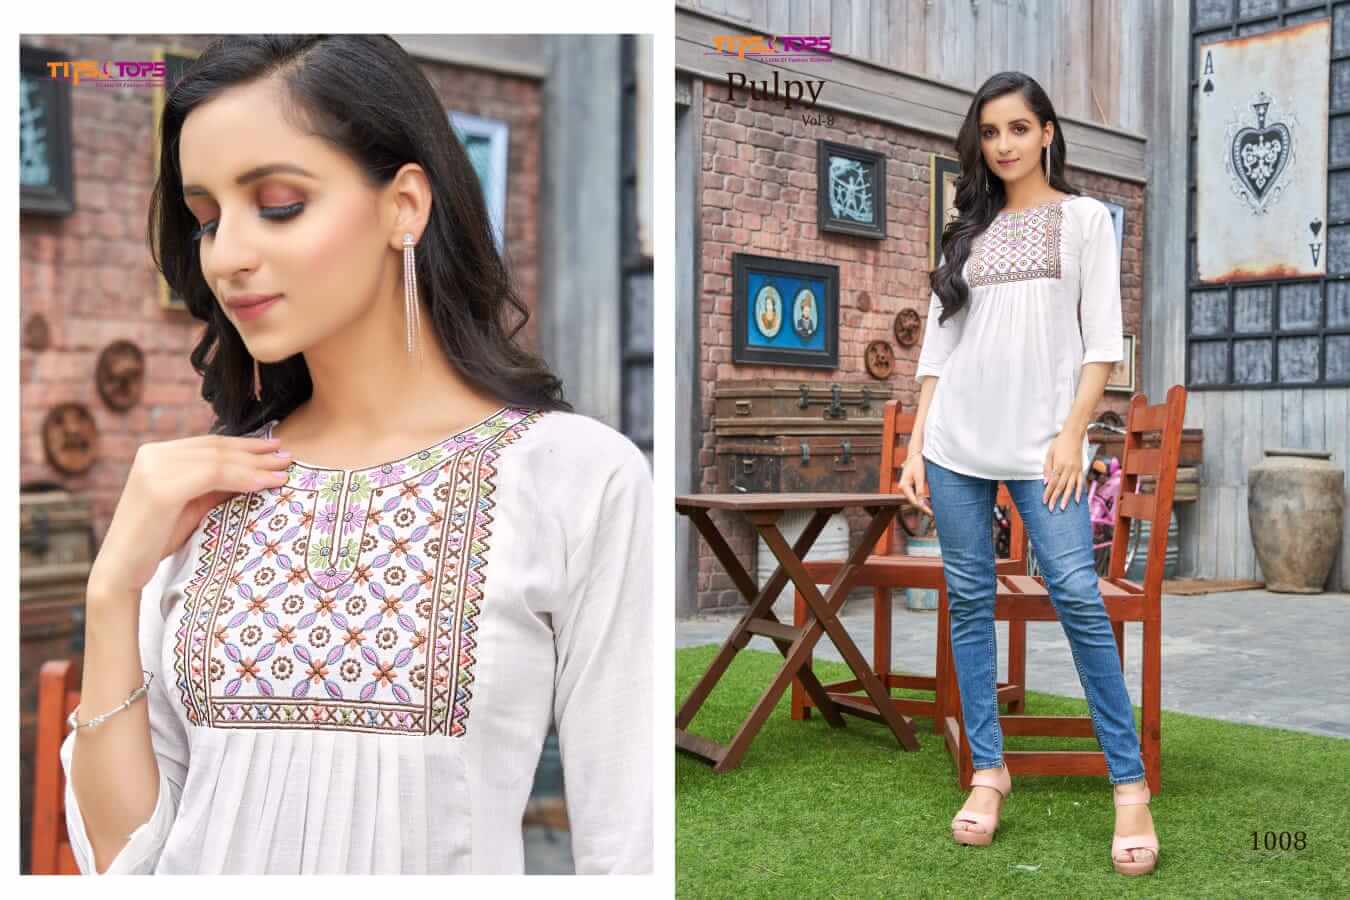 Tips And Tops Pulpy Vol 8 Western Wear collection 7